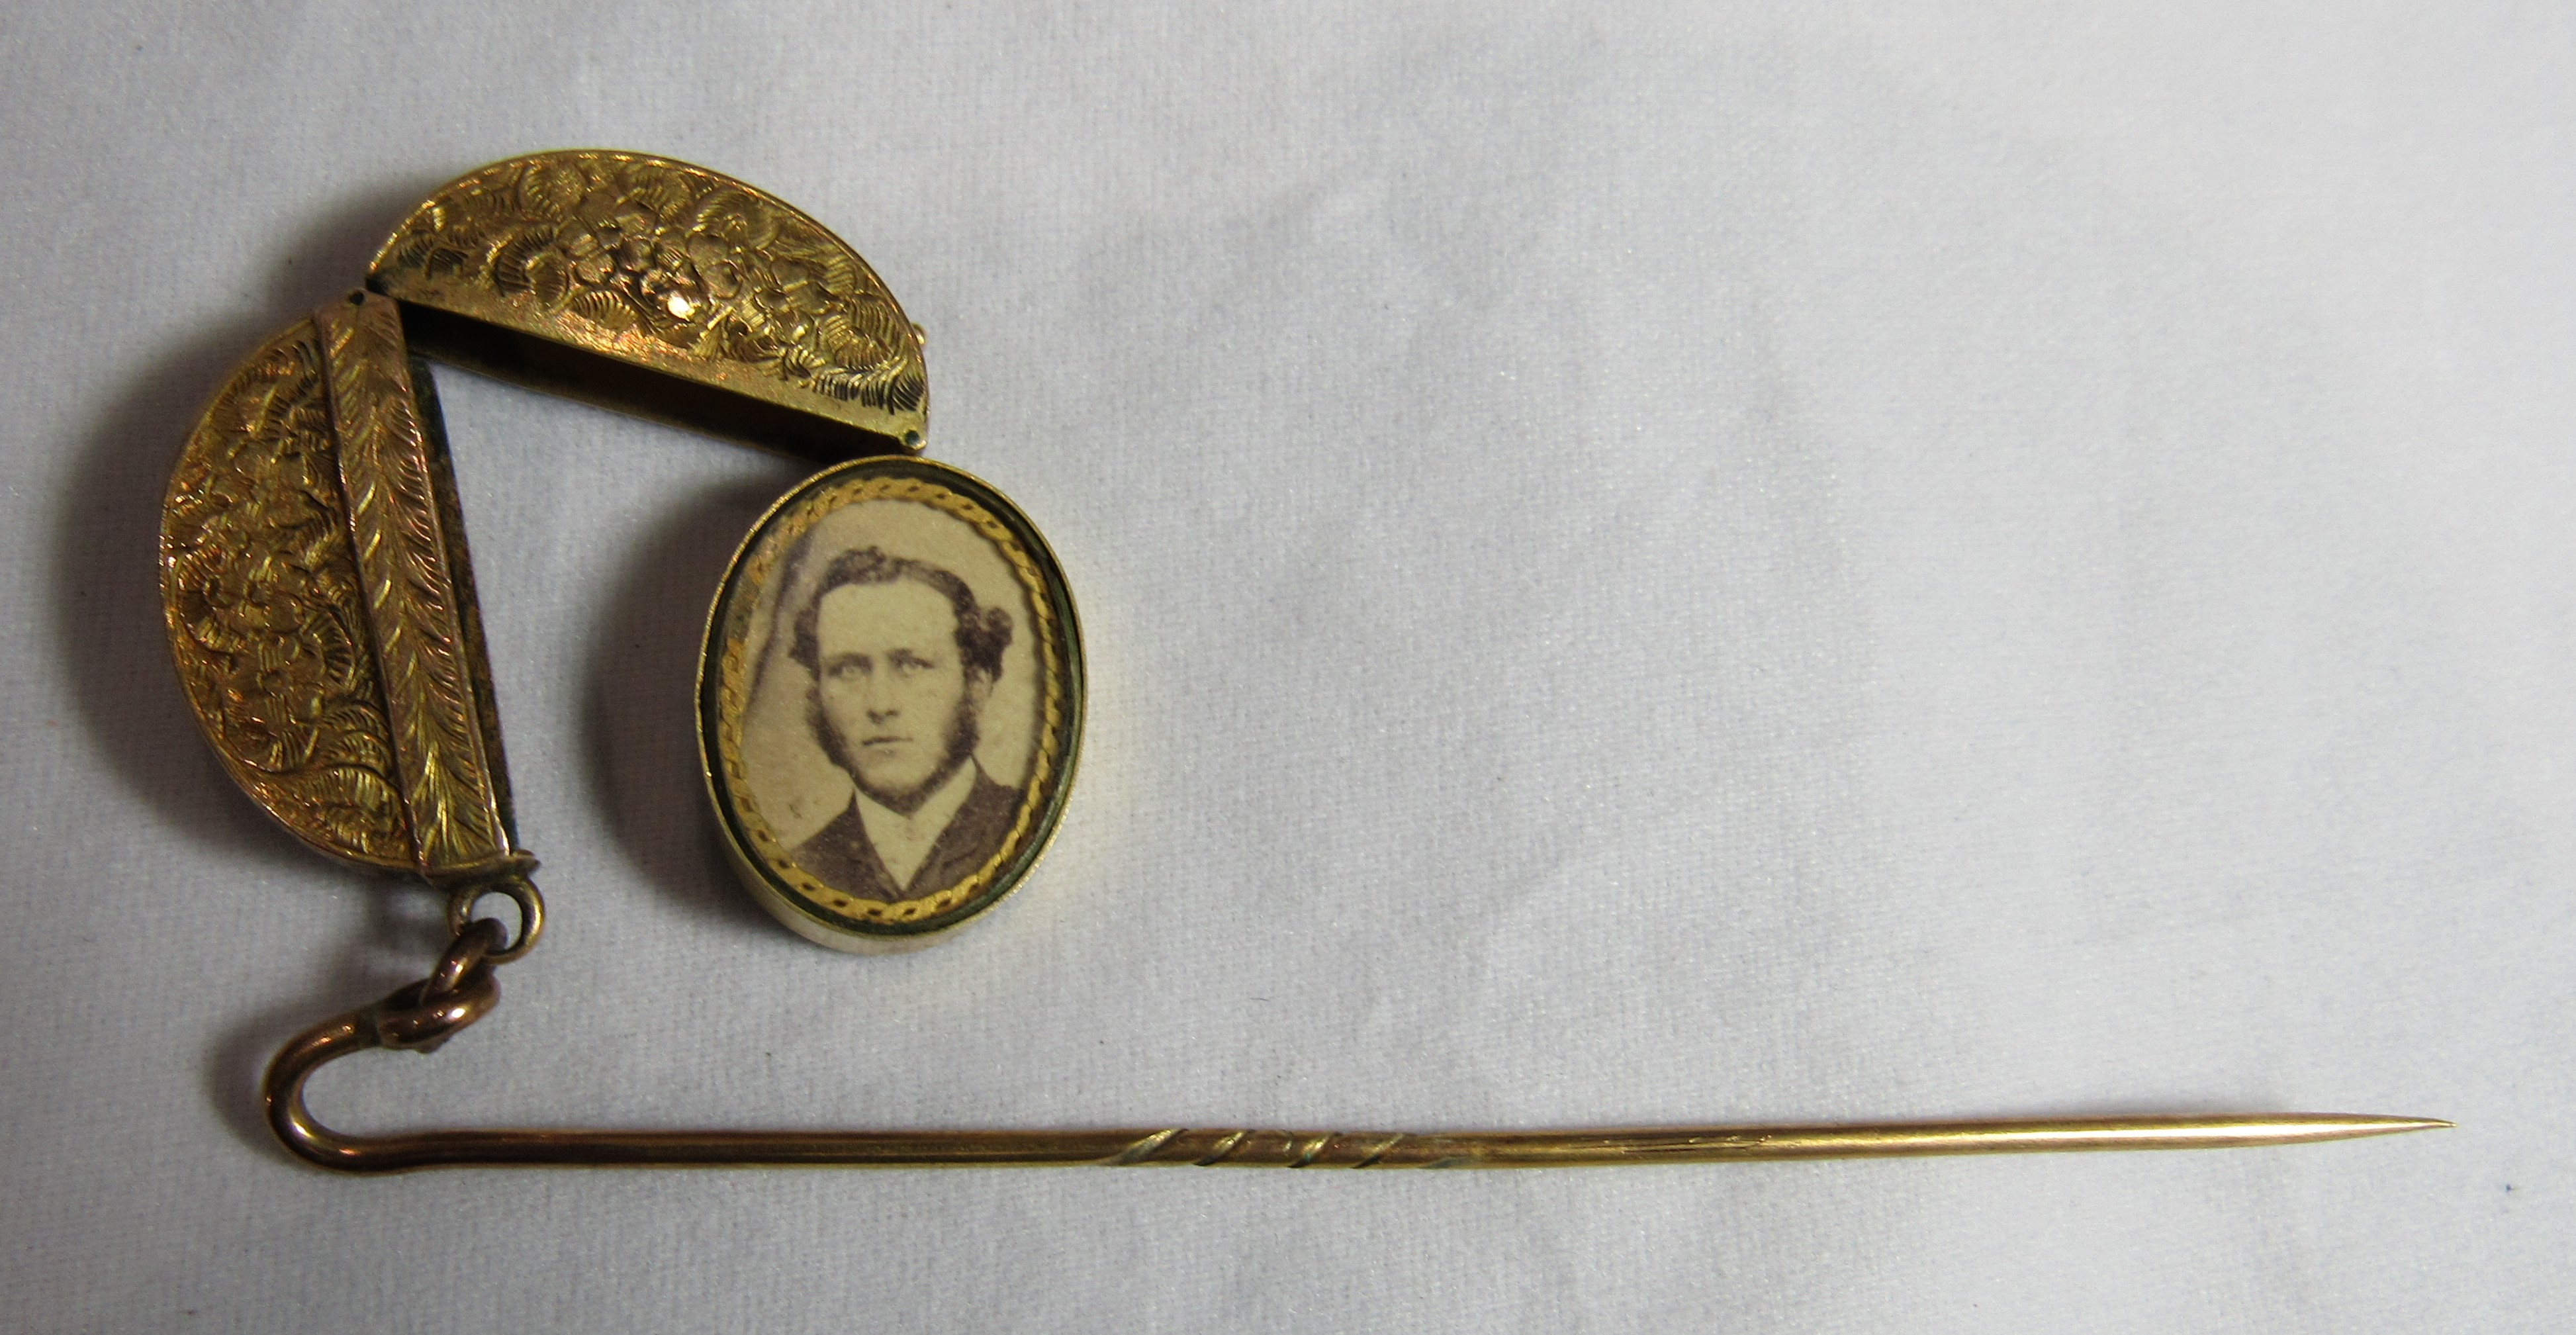 An unmarked gold or gilt hat pin with an attached oval locket with floral engraving and opens to - Image 2 of 3